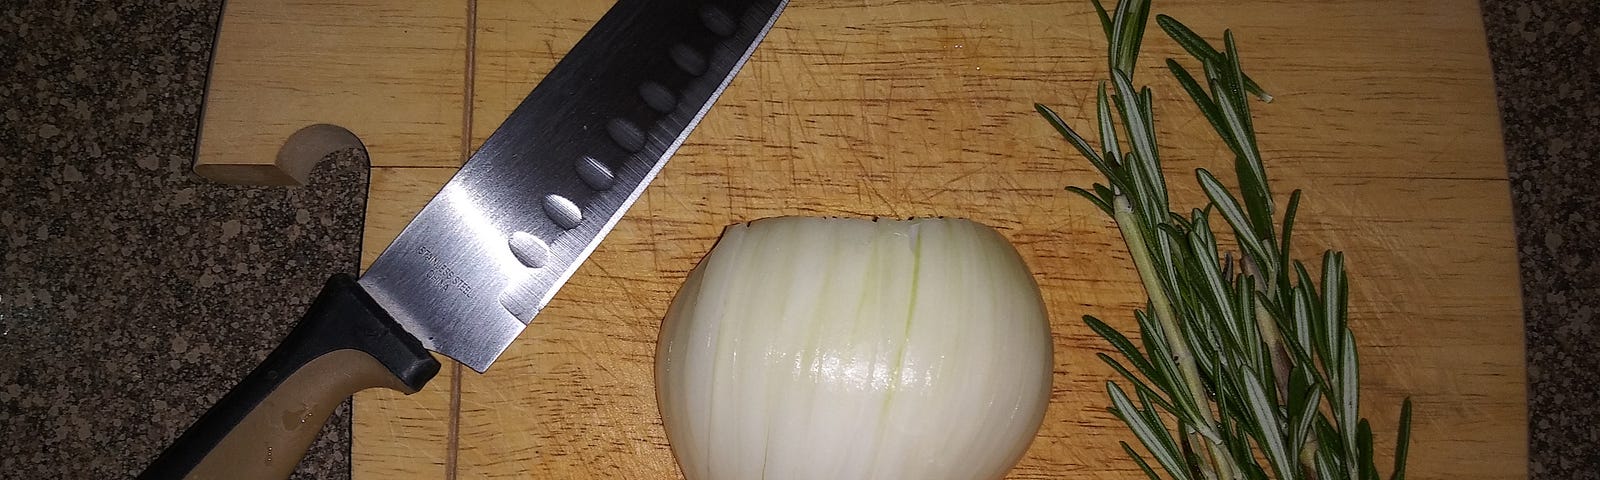 A sharp knife, half of a cut and sliced onion, and two bushy sprigs of fresh rosemary are on a wooden cutting board.